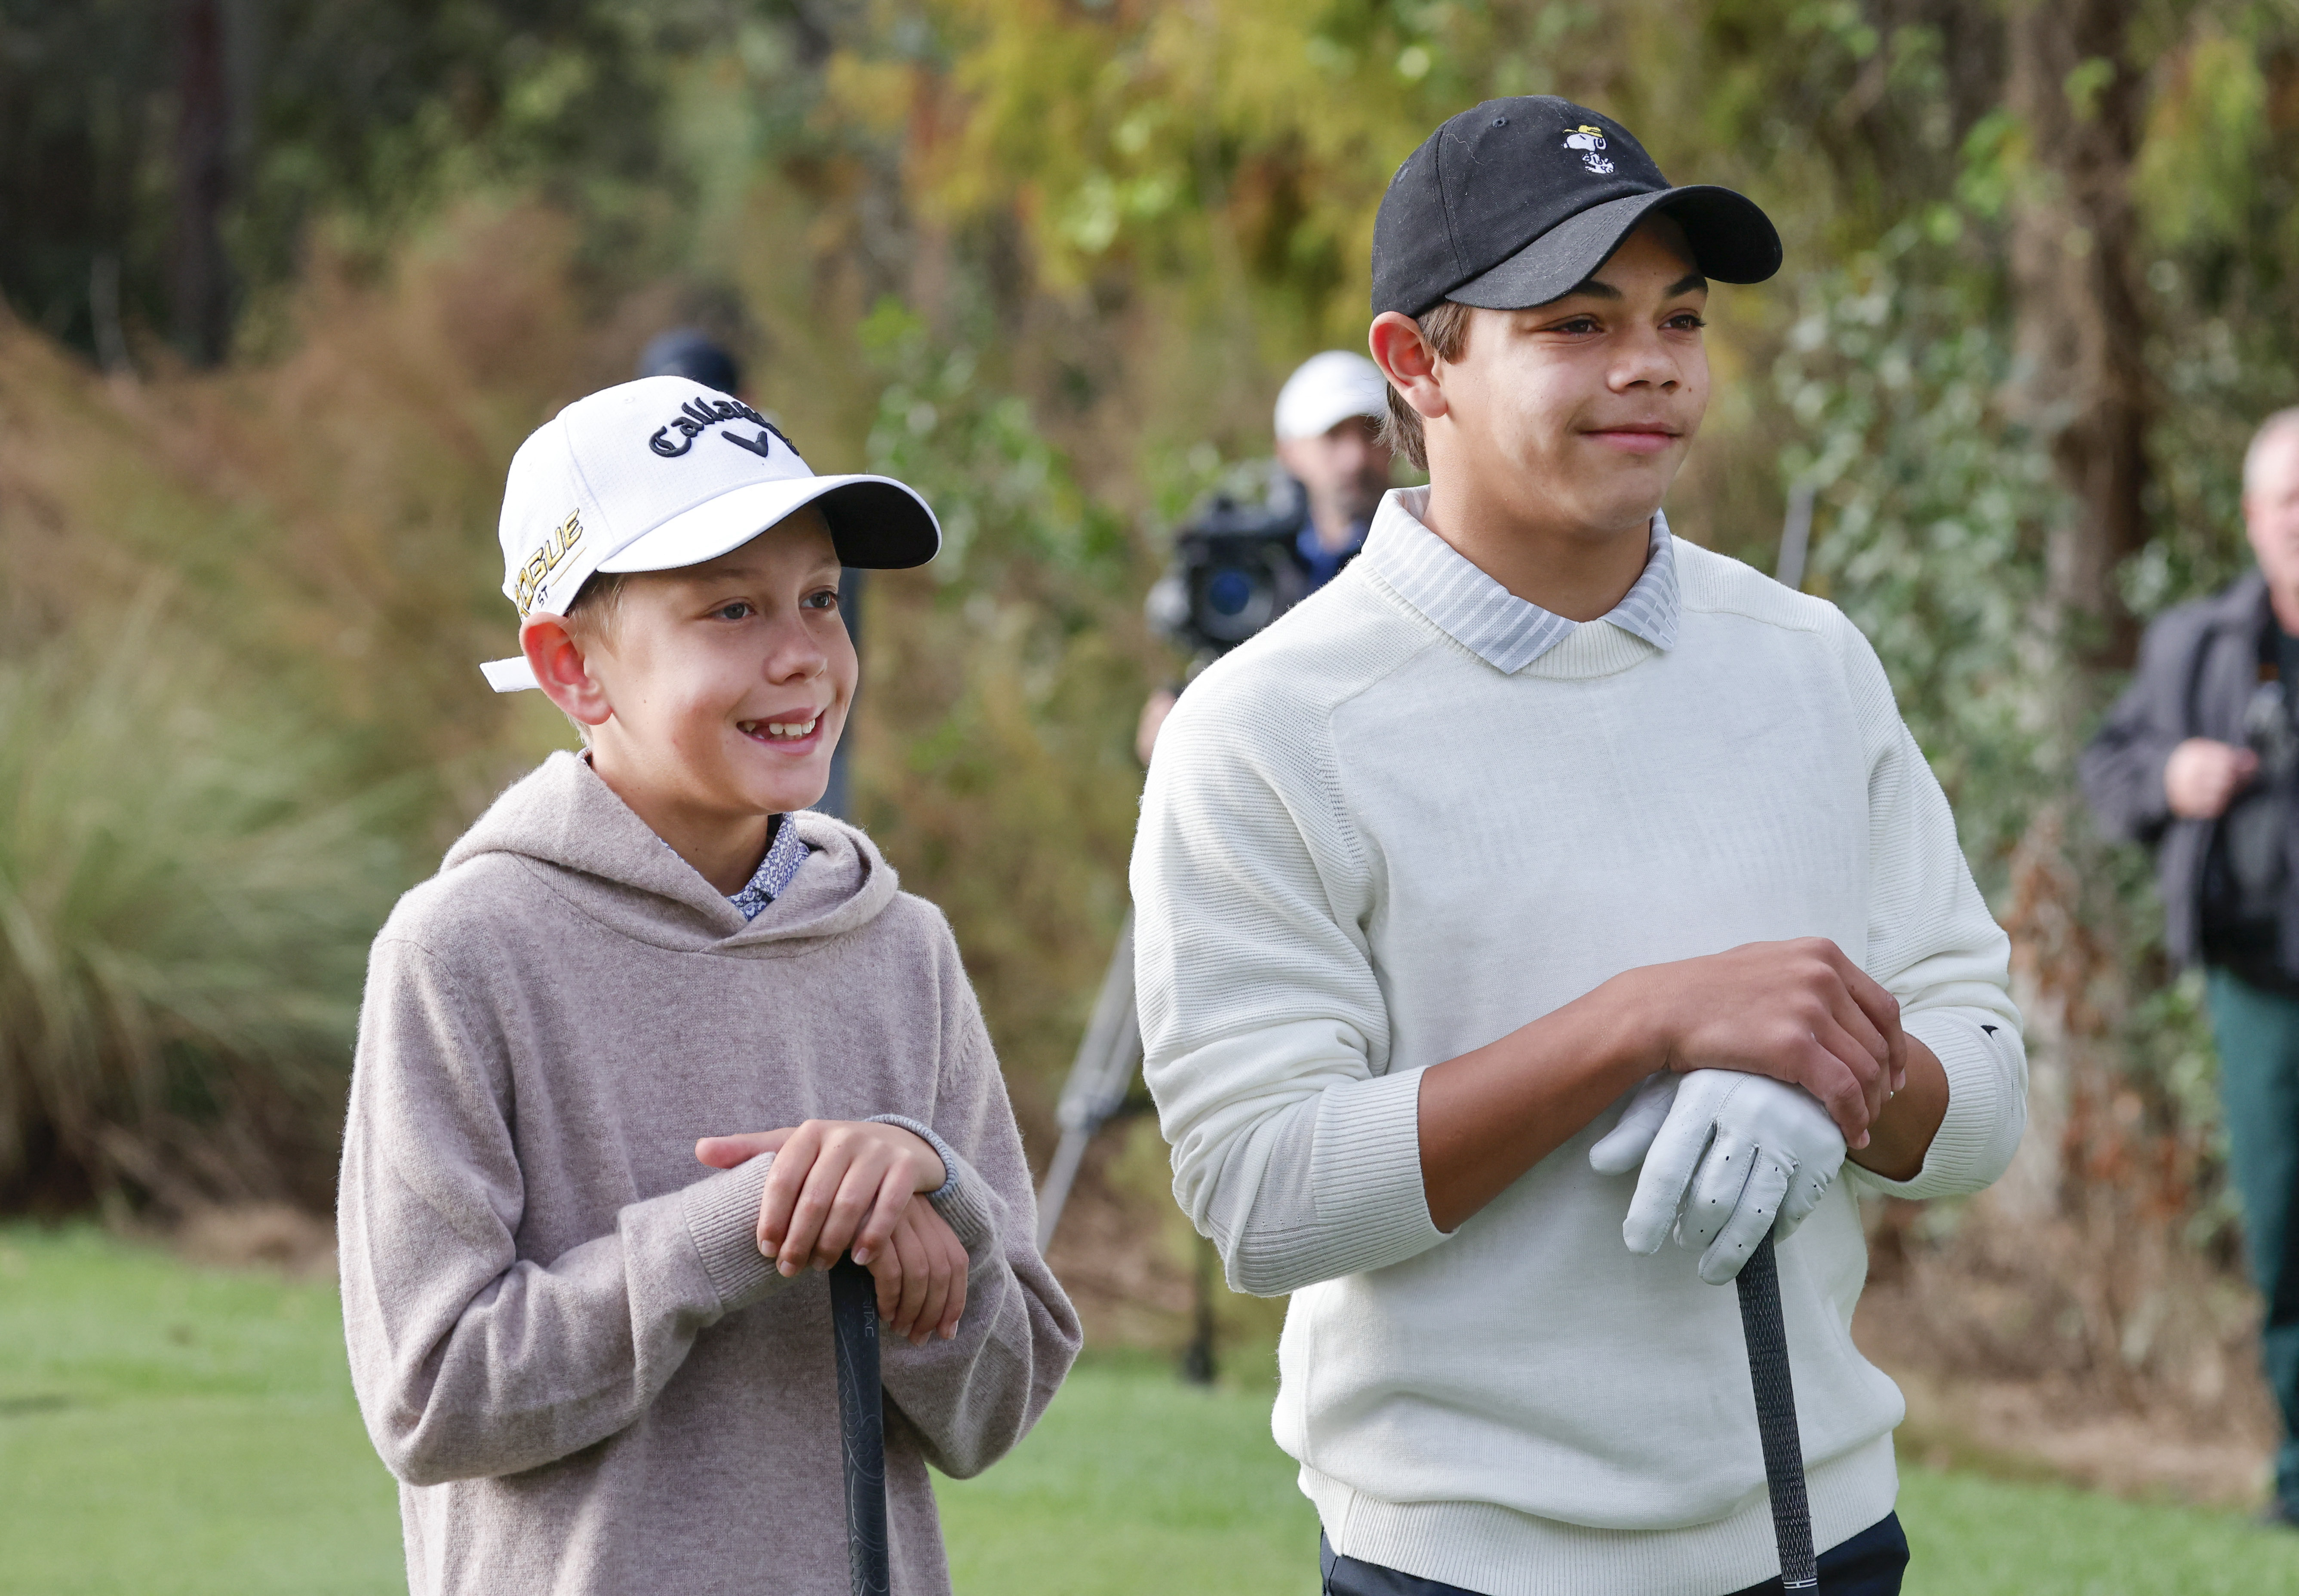 11-year-old stars in PNC Championship Pro-Am after almost holing fairway shot GolfMagic